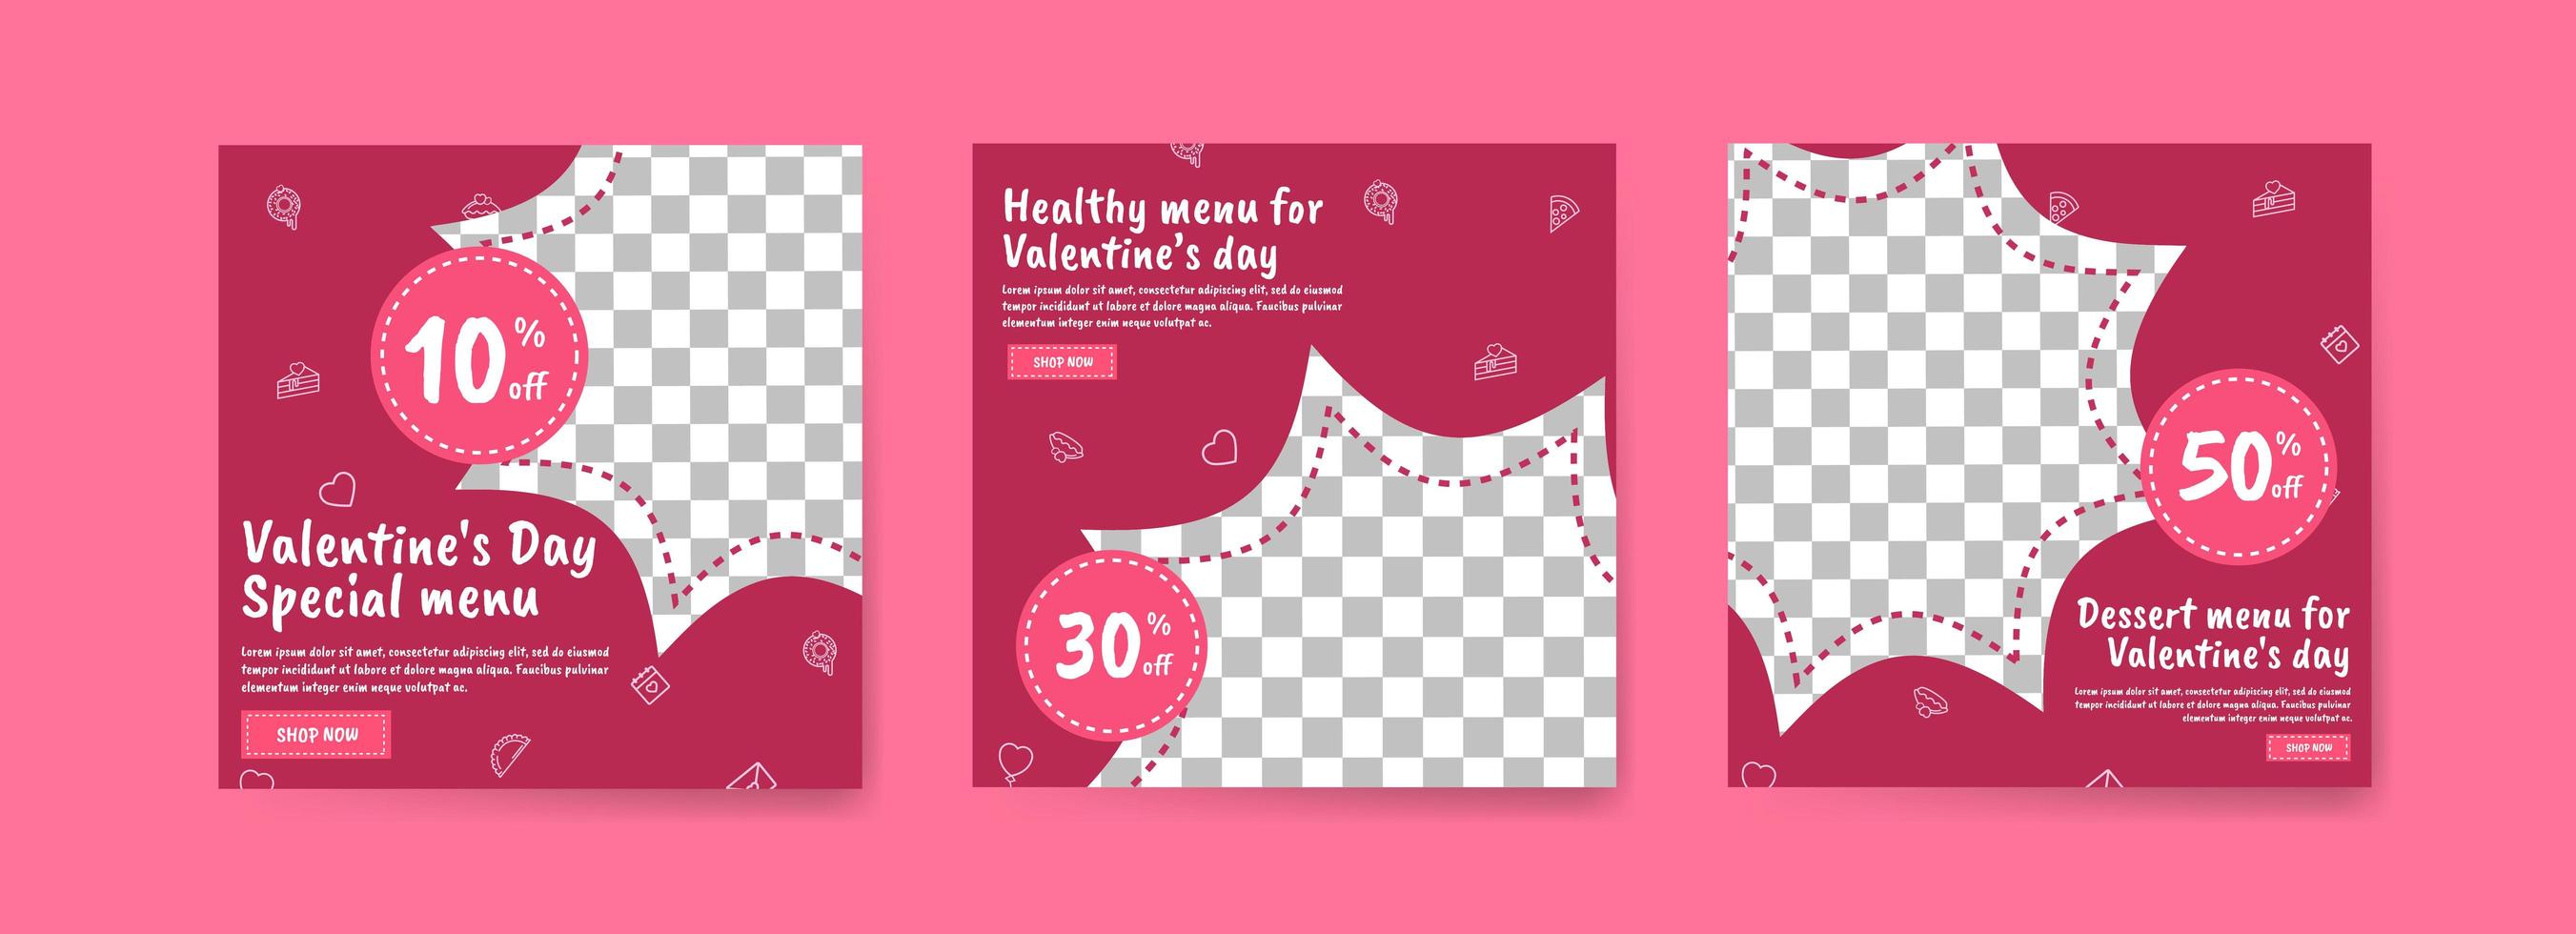 Social media post template for digital marketing and sales promotion on Valentine's Day. Advertising for Valentine's Day special food menus. Nice healthy food for valentine's day vector